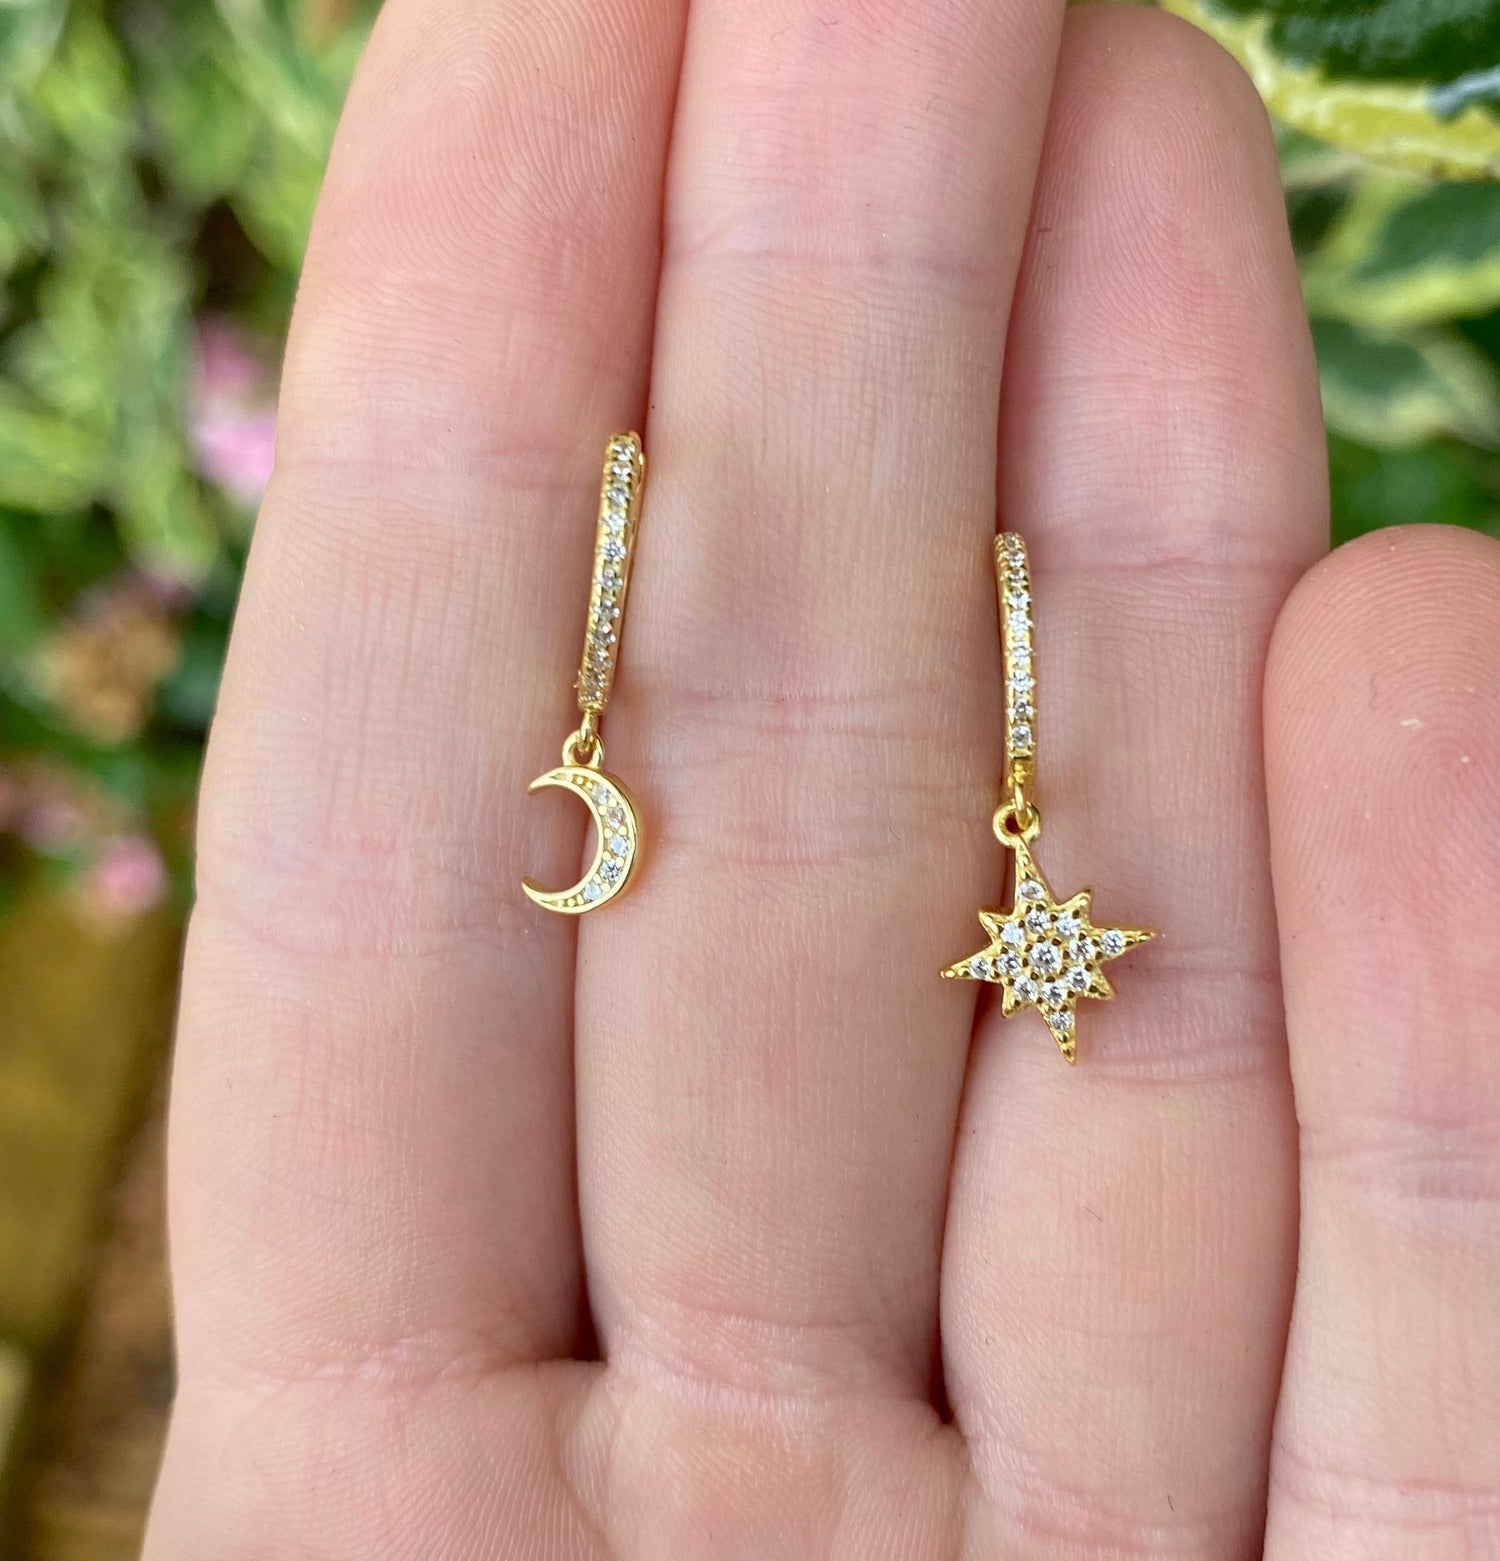 925 sterling silver and gold plated star and moon cosmic stack huggies earrings hoops